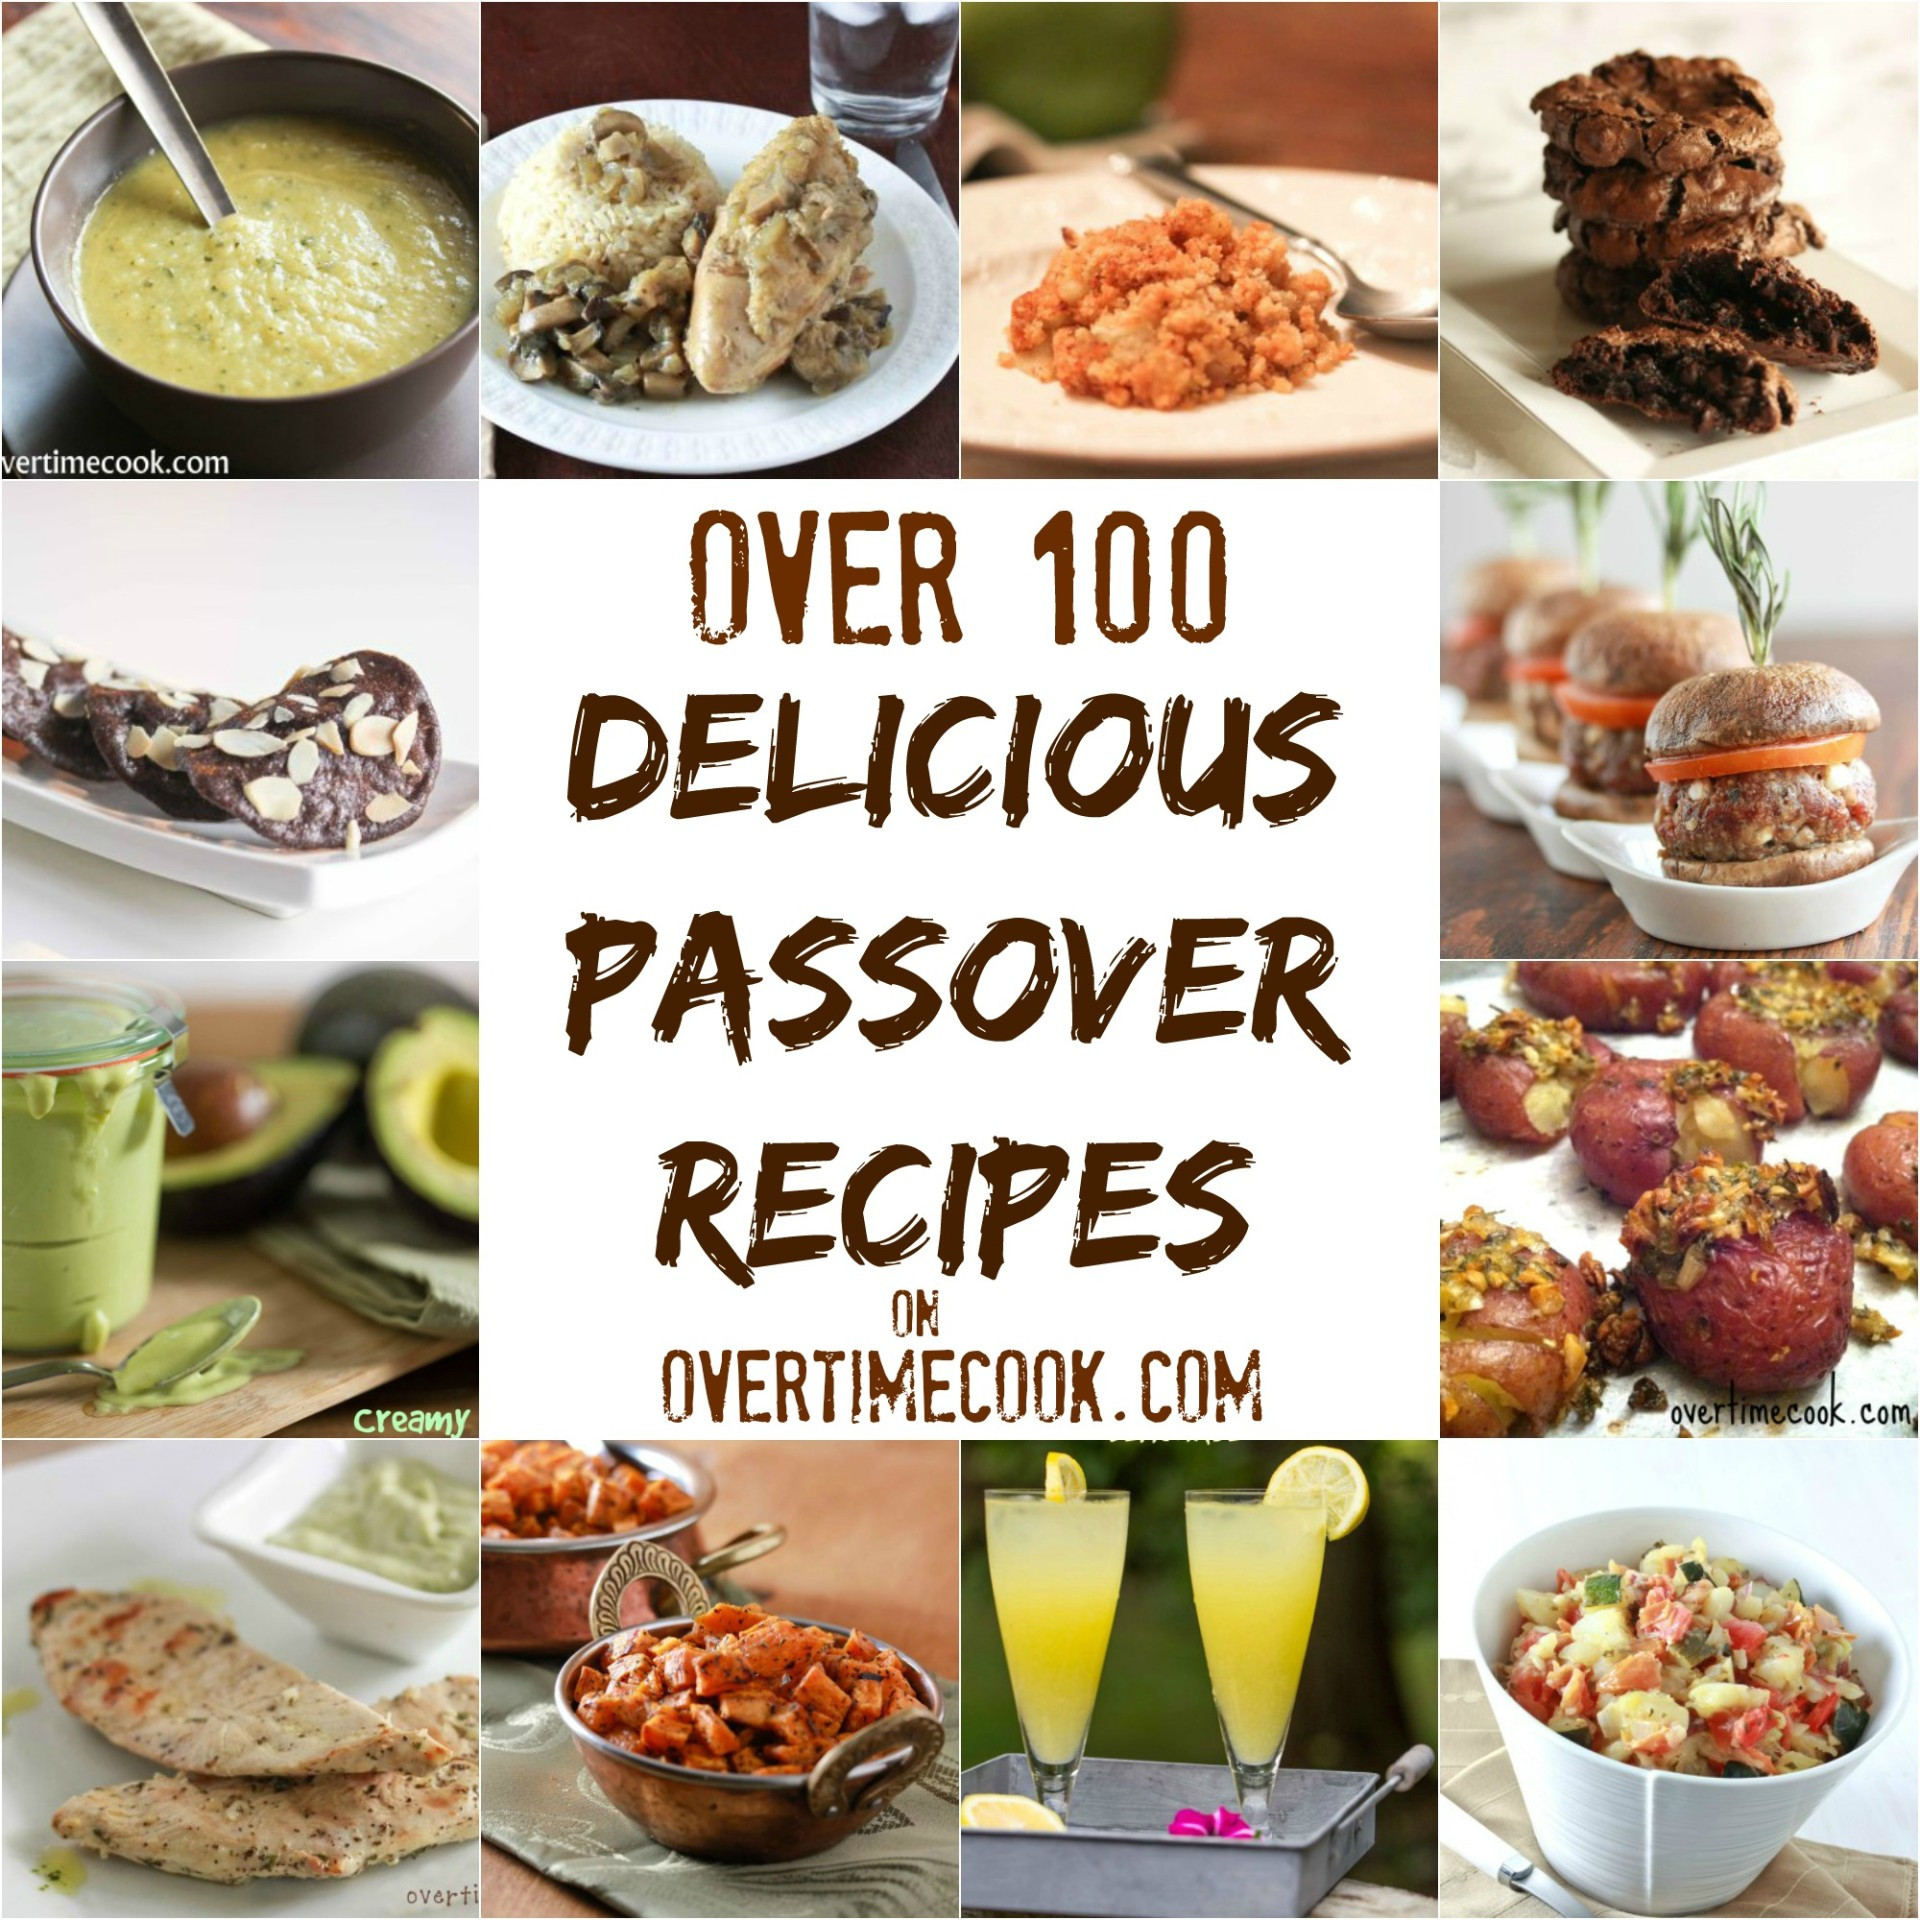 Kosher For Passover Food List
 Over 100 Delicious Passover Recipes Overtime Cook